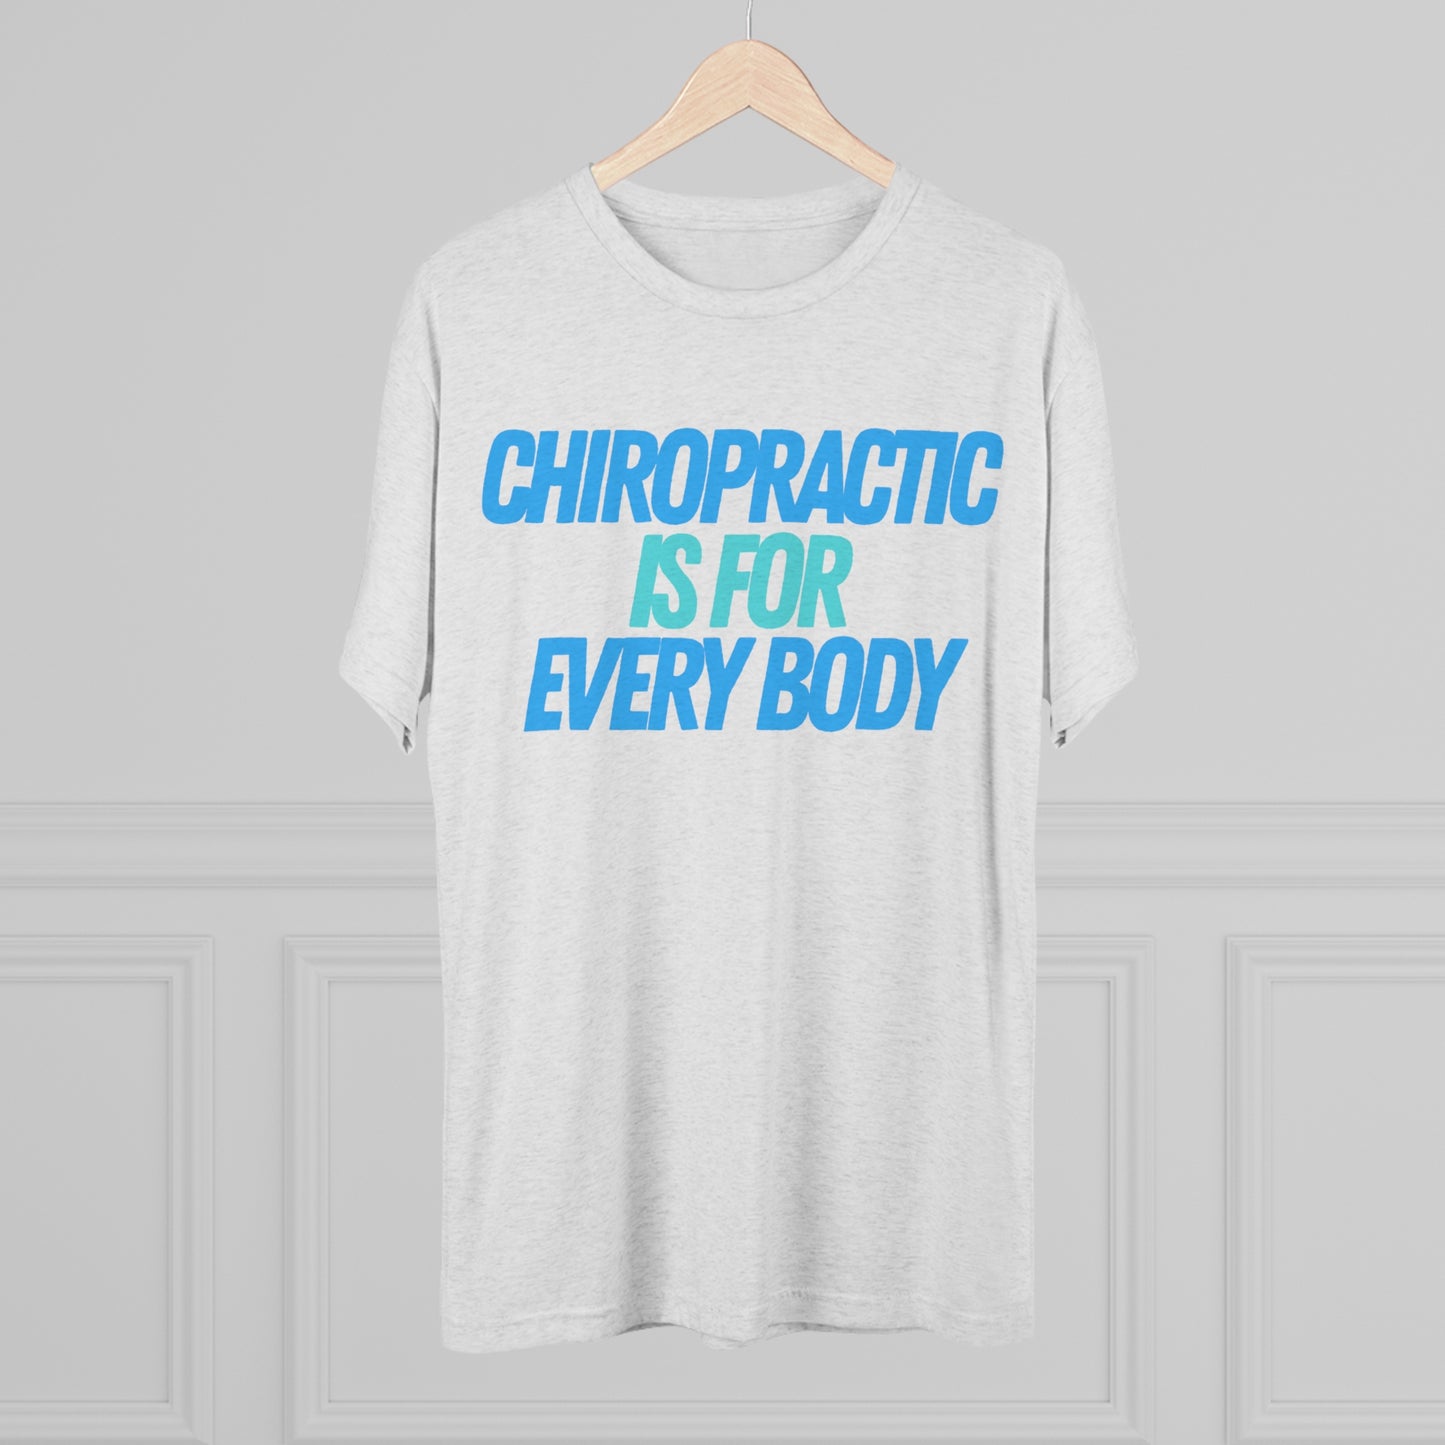 Chiropractic Is For Every Body - Next Level Men's Tri-Blend Crew Tee